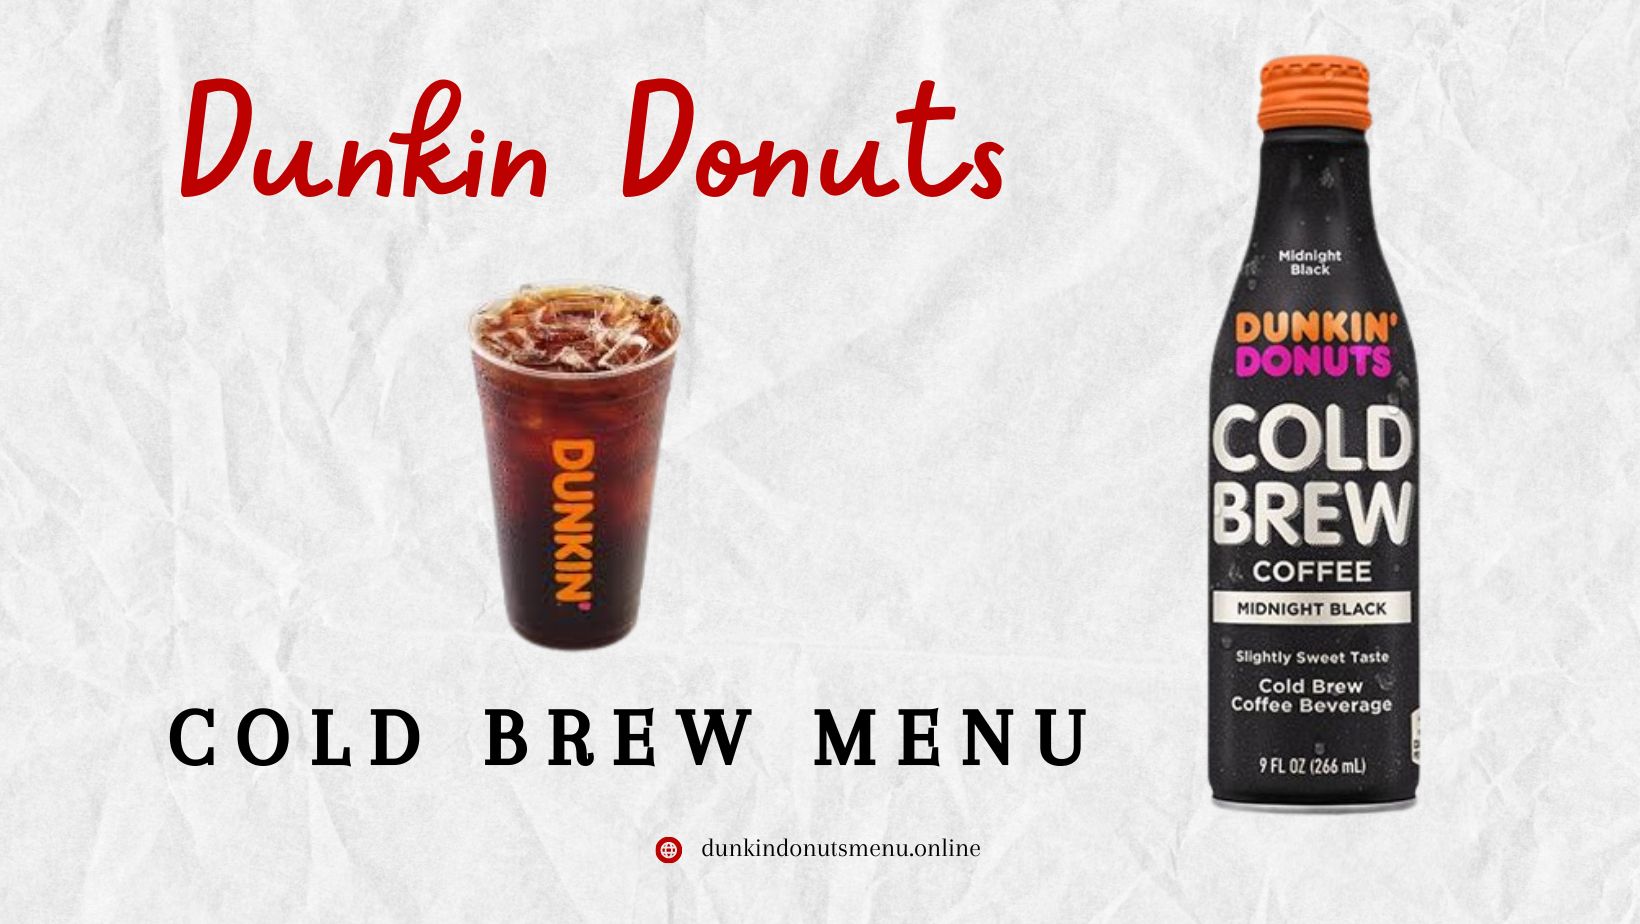 Dunkin Donuts Cold Brew Menu With Price